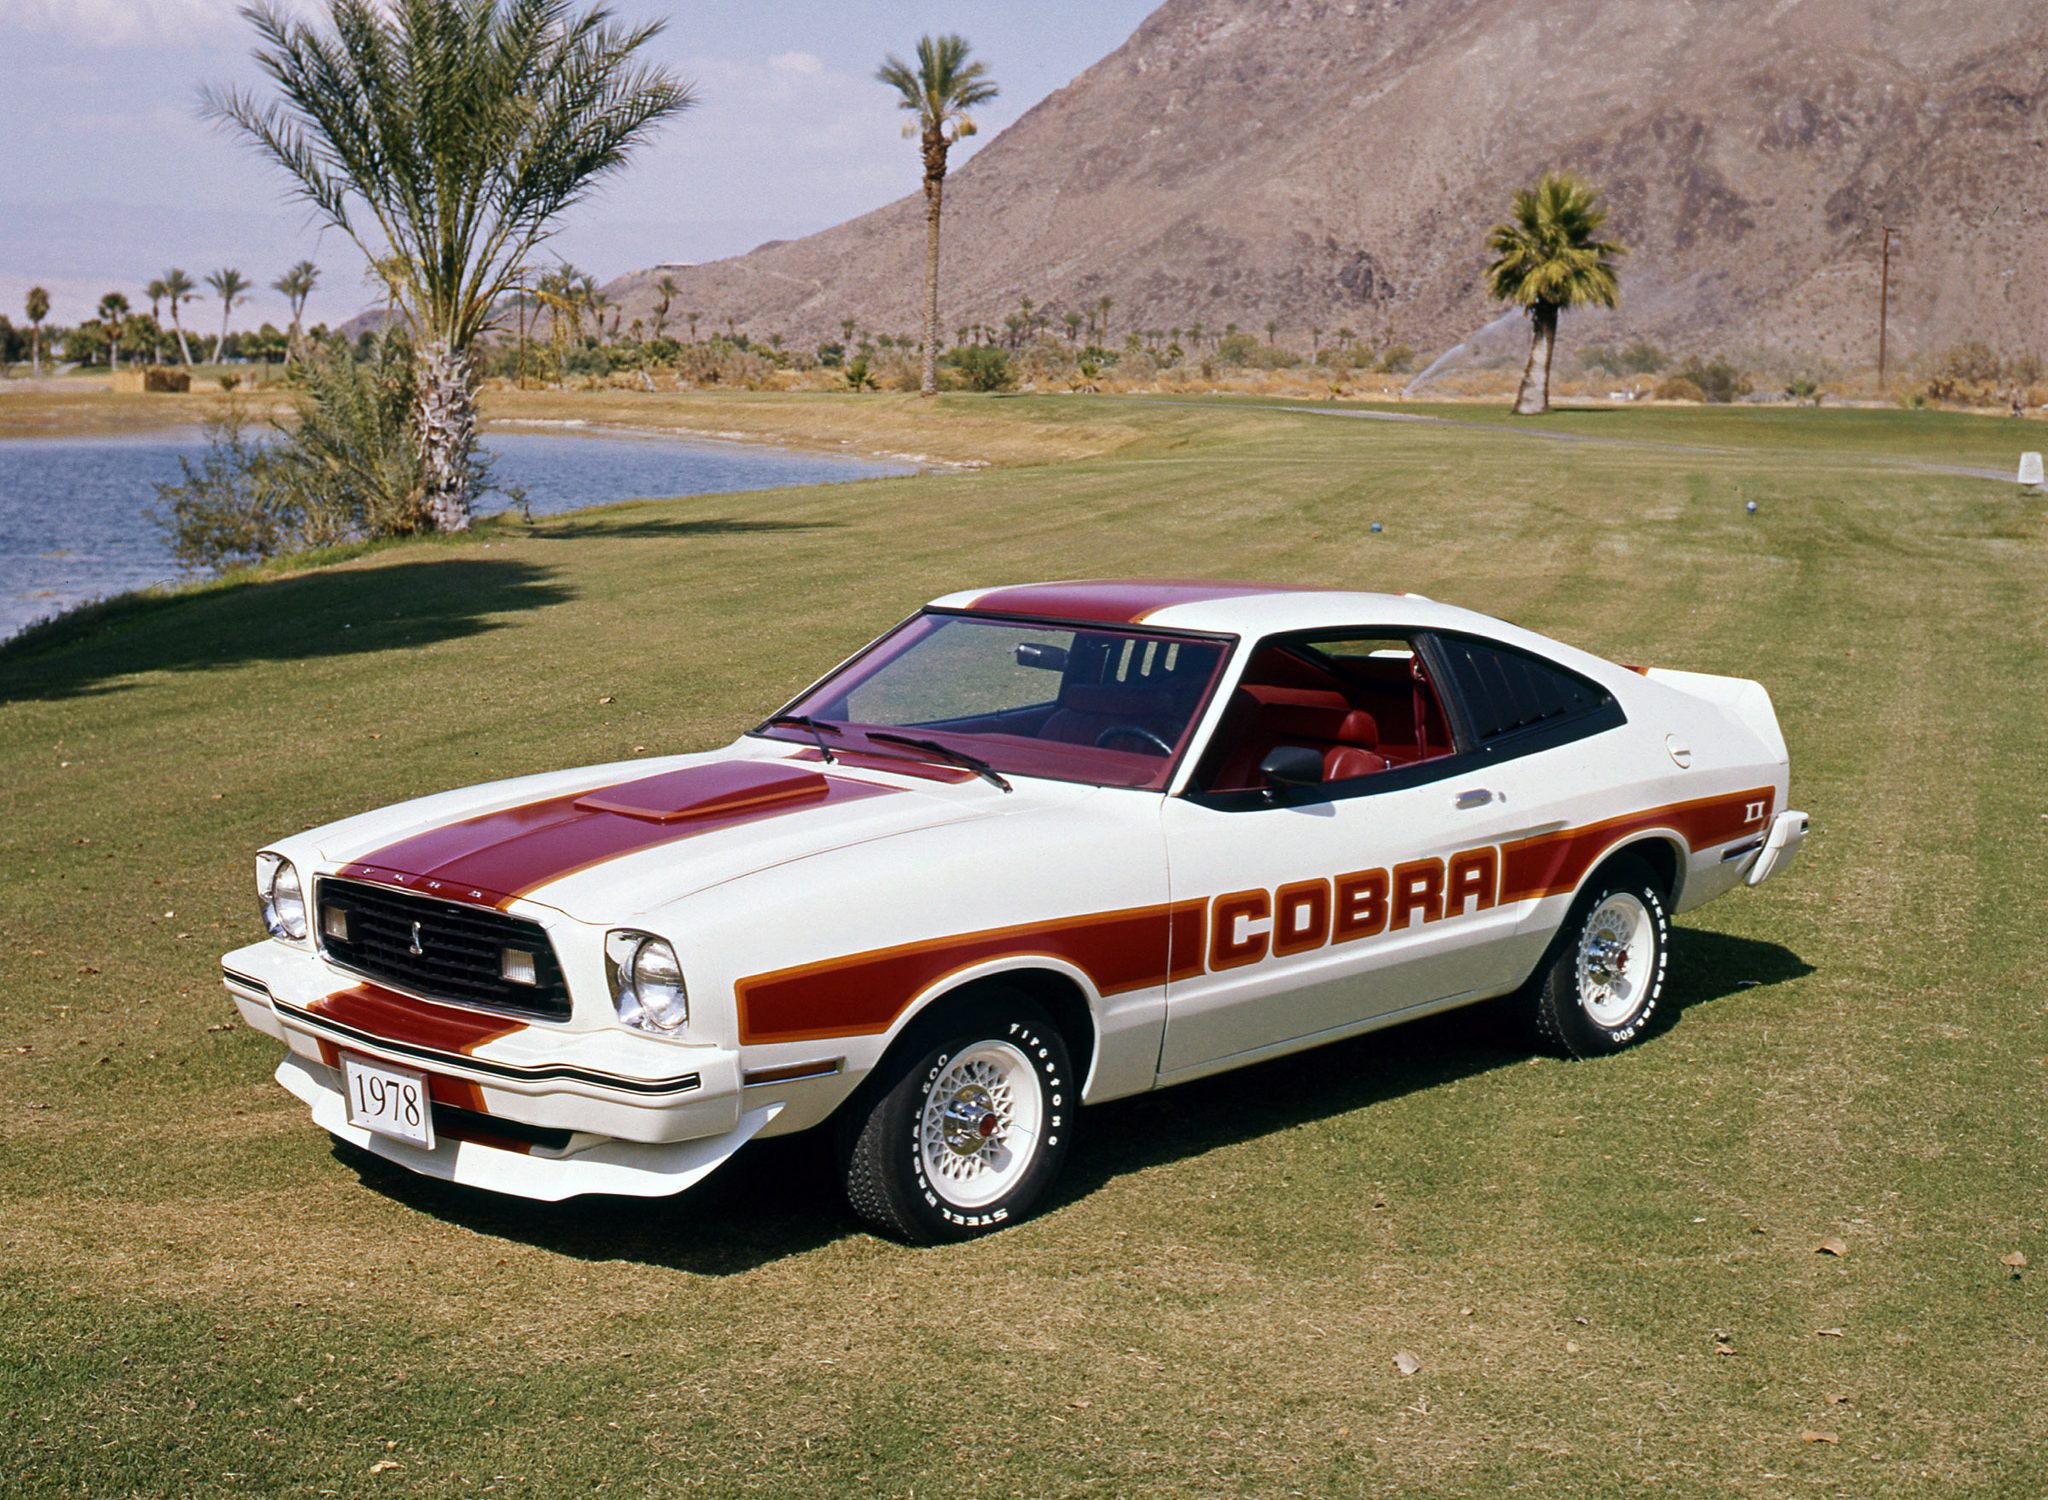 Mustang Of The Day: 1978 Ford Mustang Cobra II